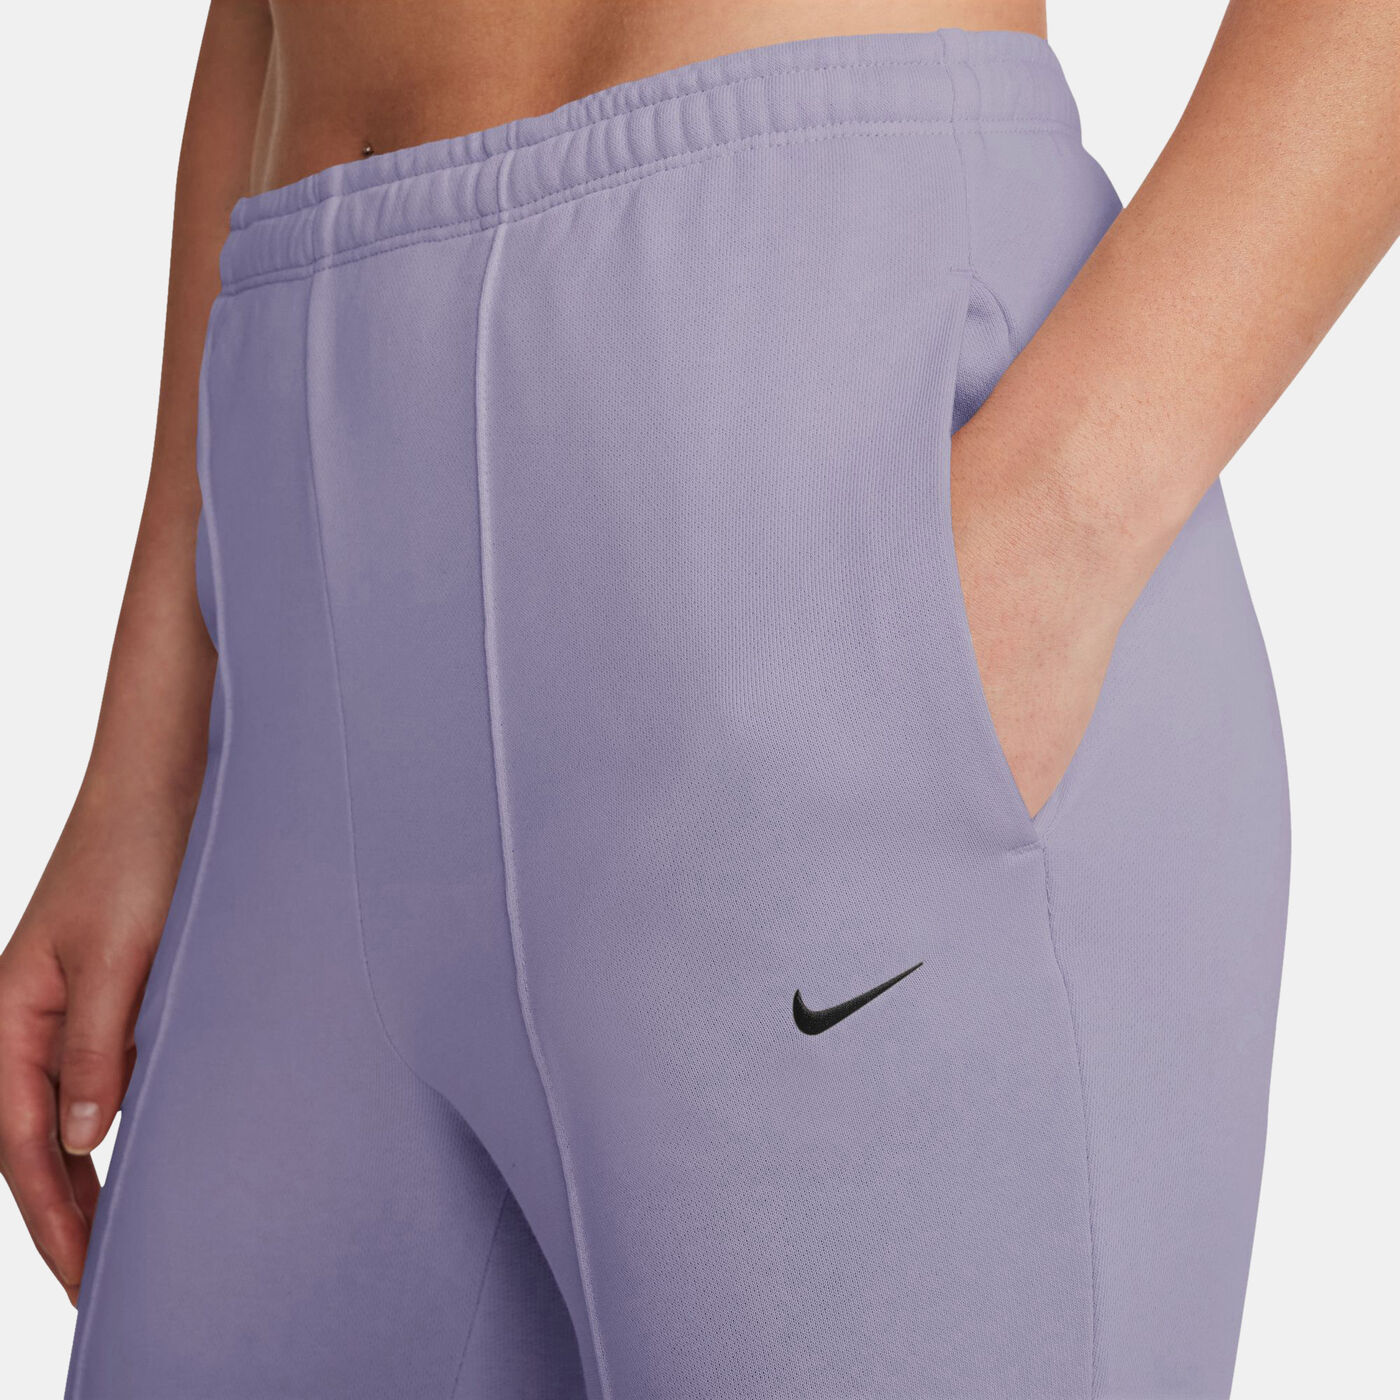 Women's High-Waisted French Terry Sweatpants